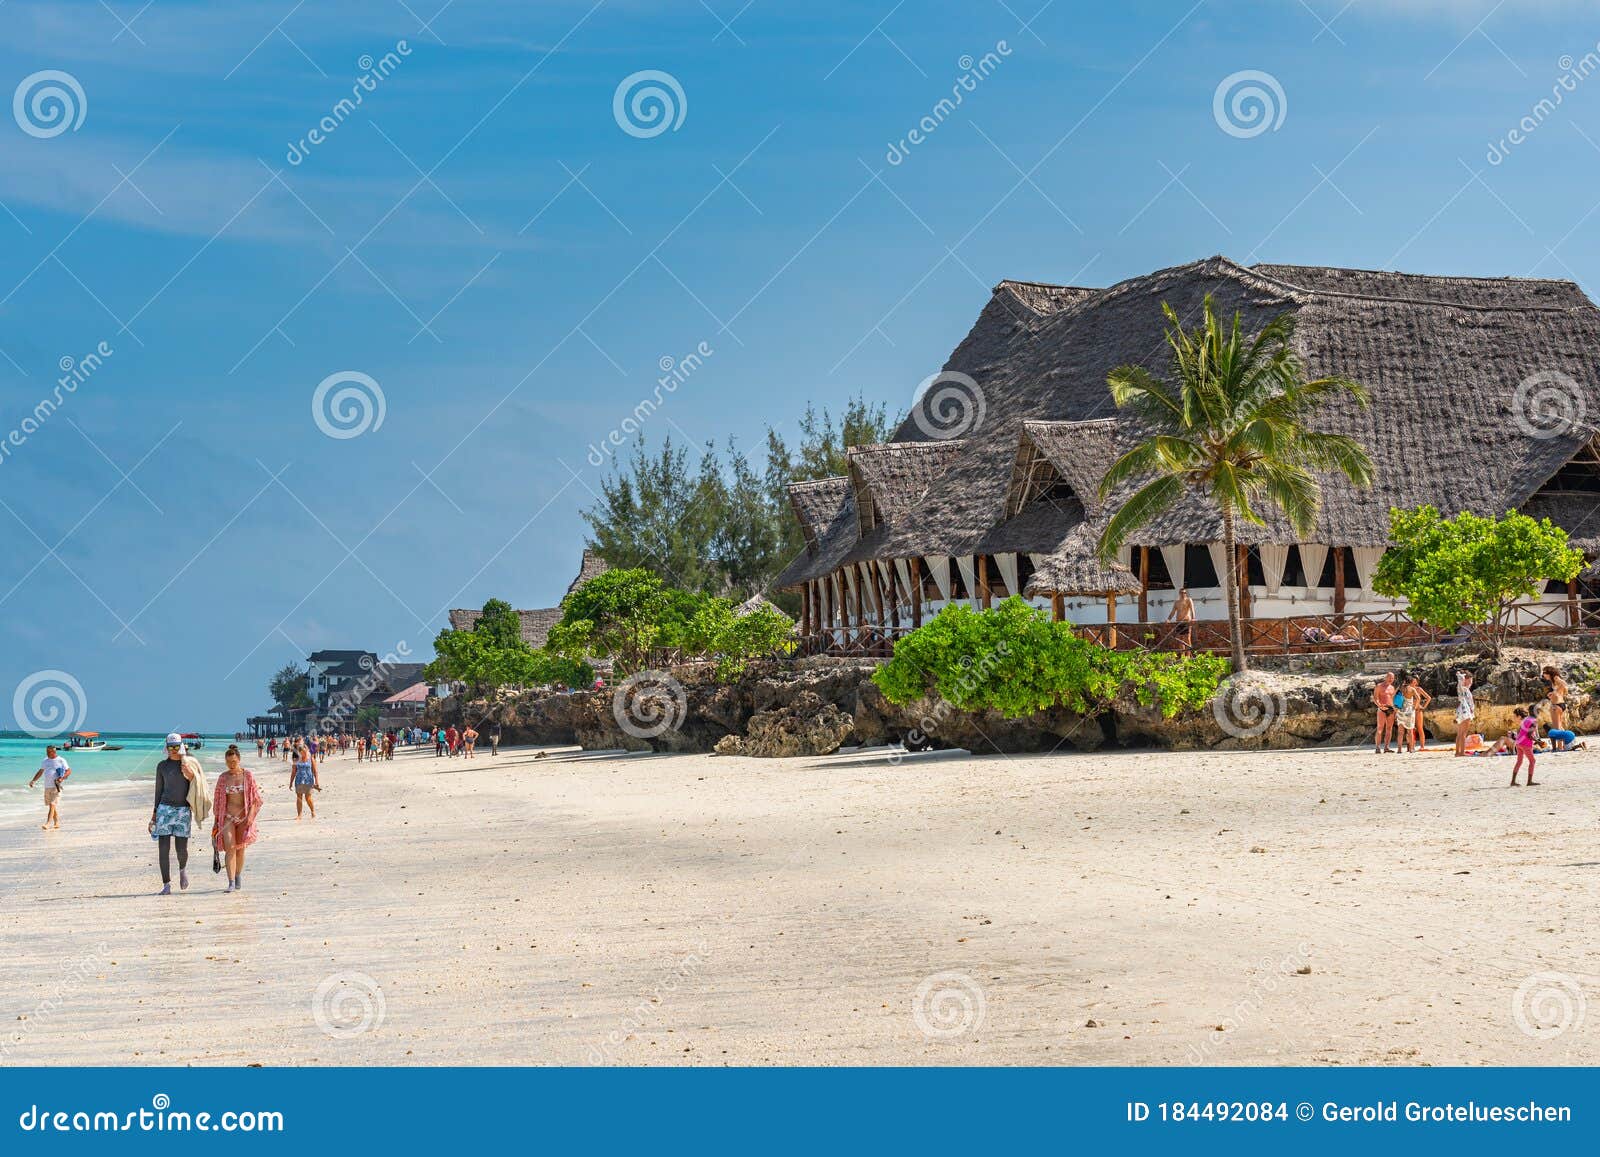 People At The Tropical White Beach Of Zanzibar Island Tanzania Eastern Africa Turquoise Ocean Blue Cloudy Sky Editorial Stock Image Image Of 2020 Coastline 184492084